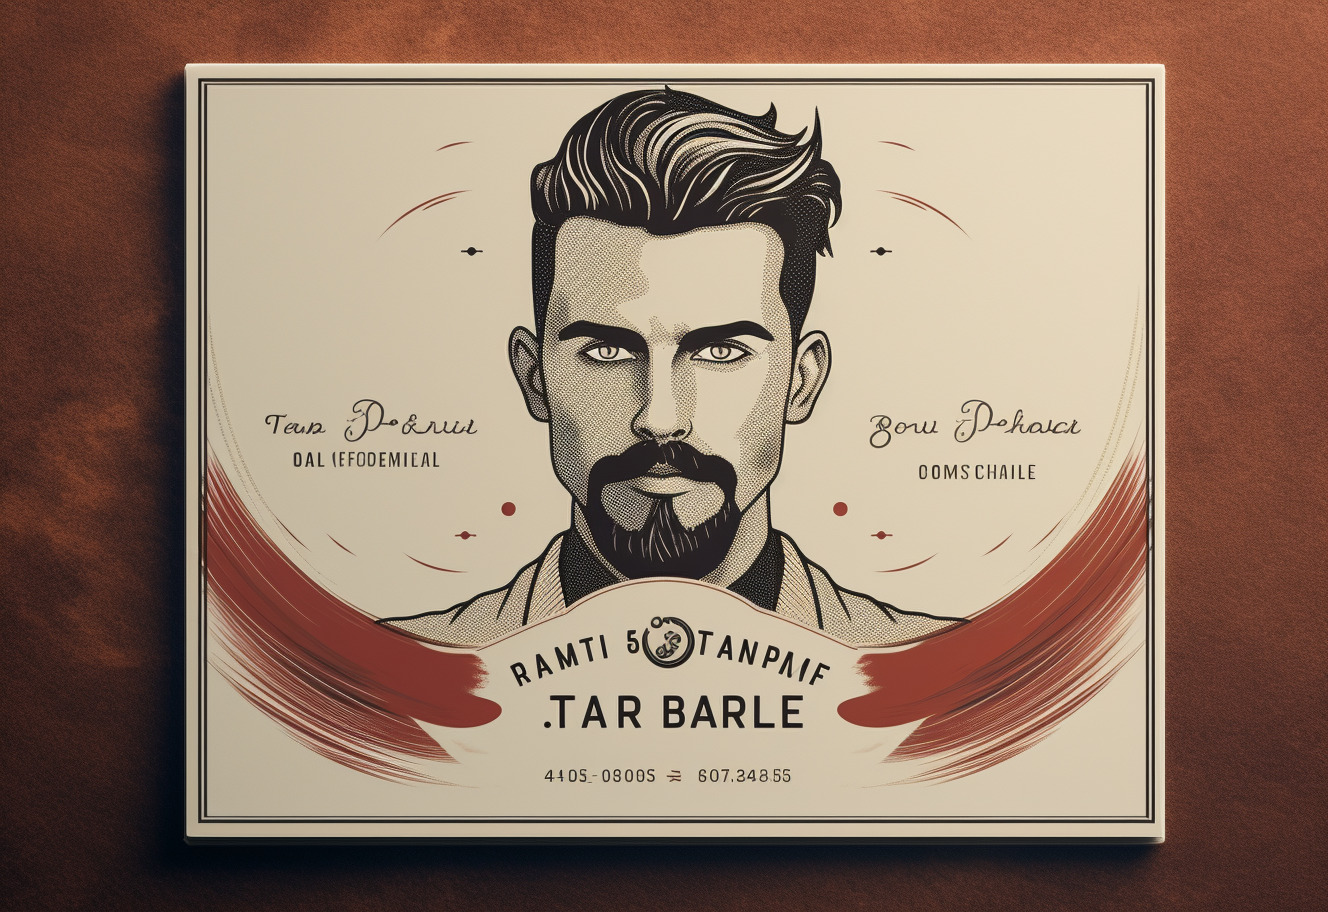 Barber Business Cards featuring Bearded Man Charm for a Memorable Impression